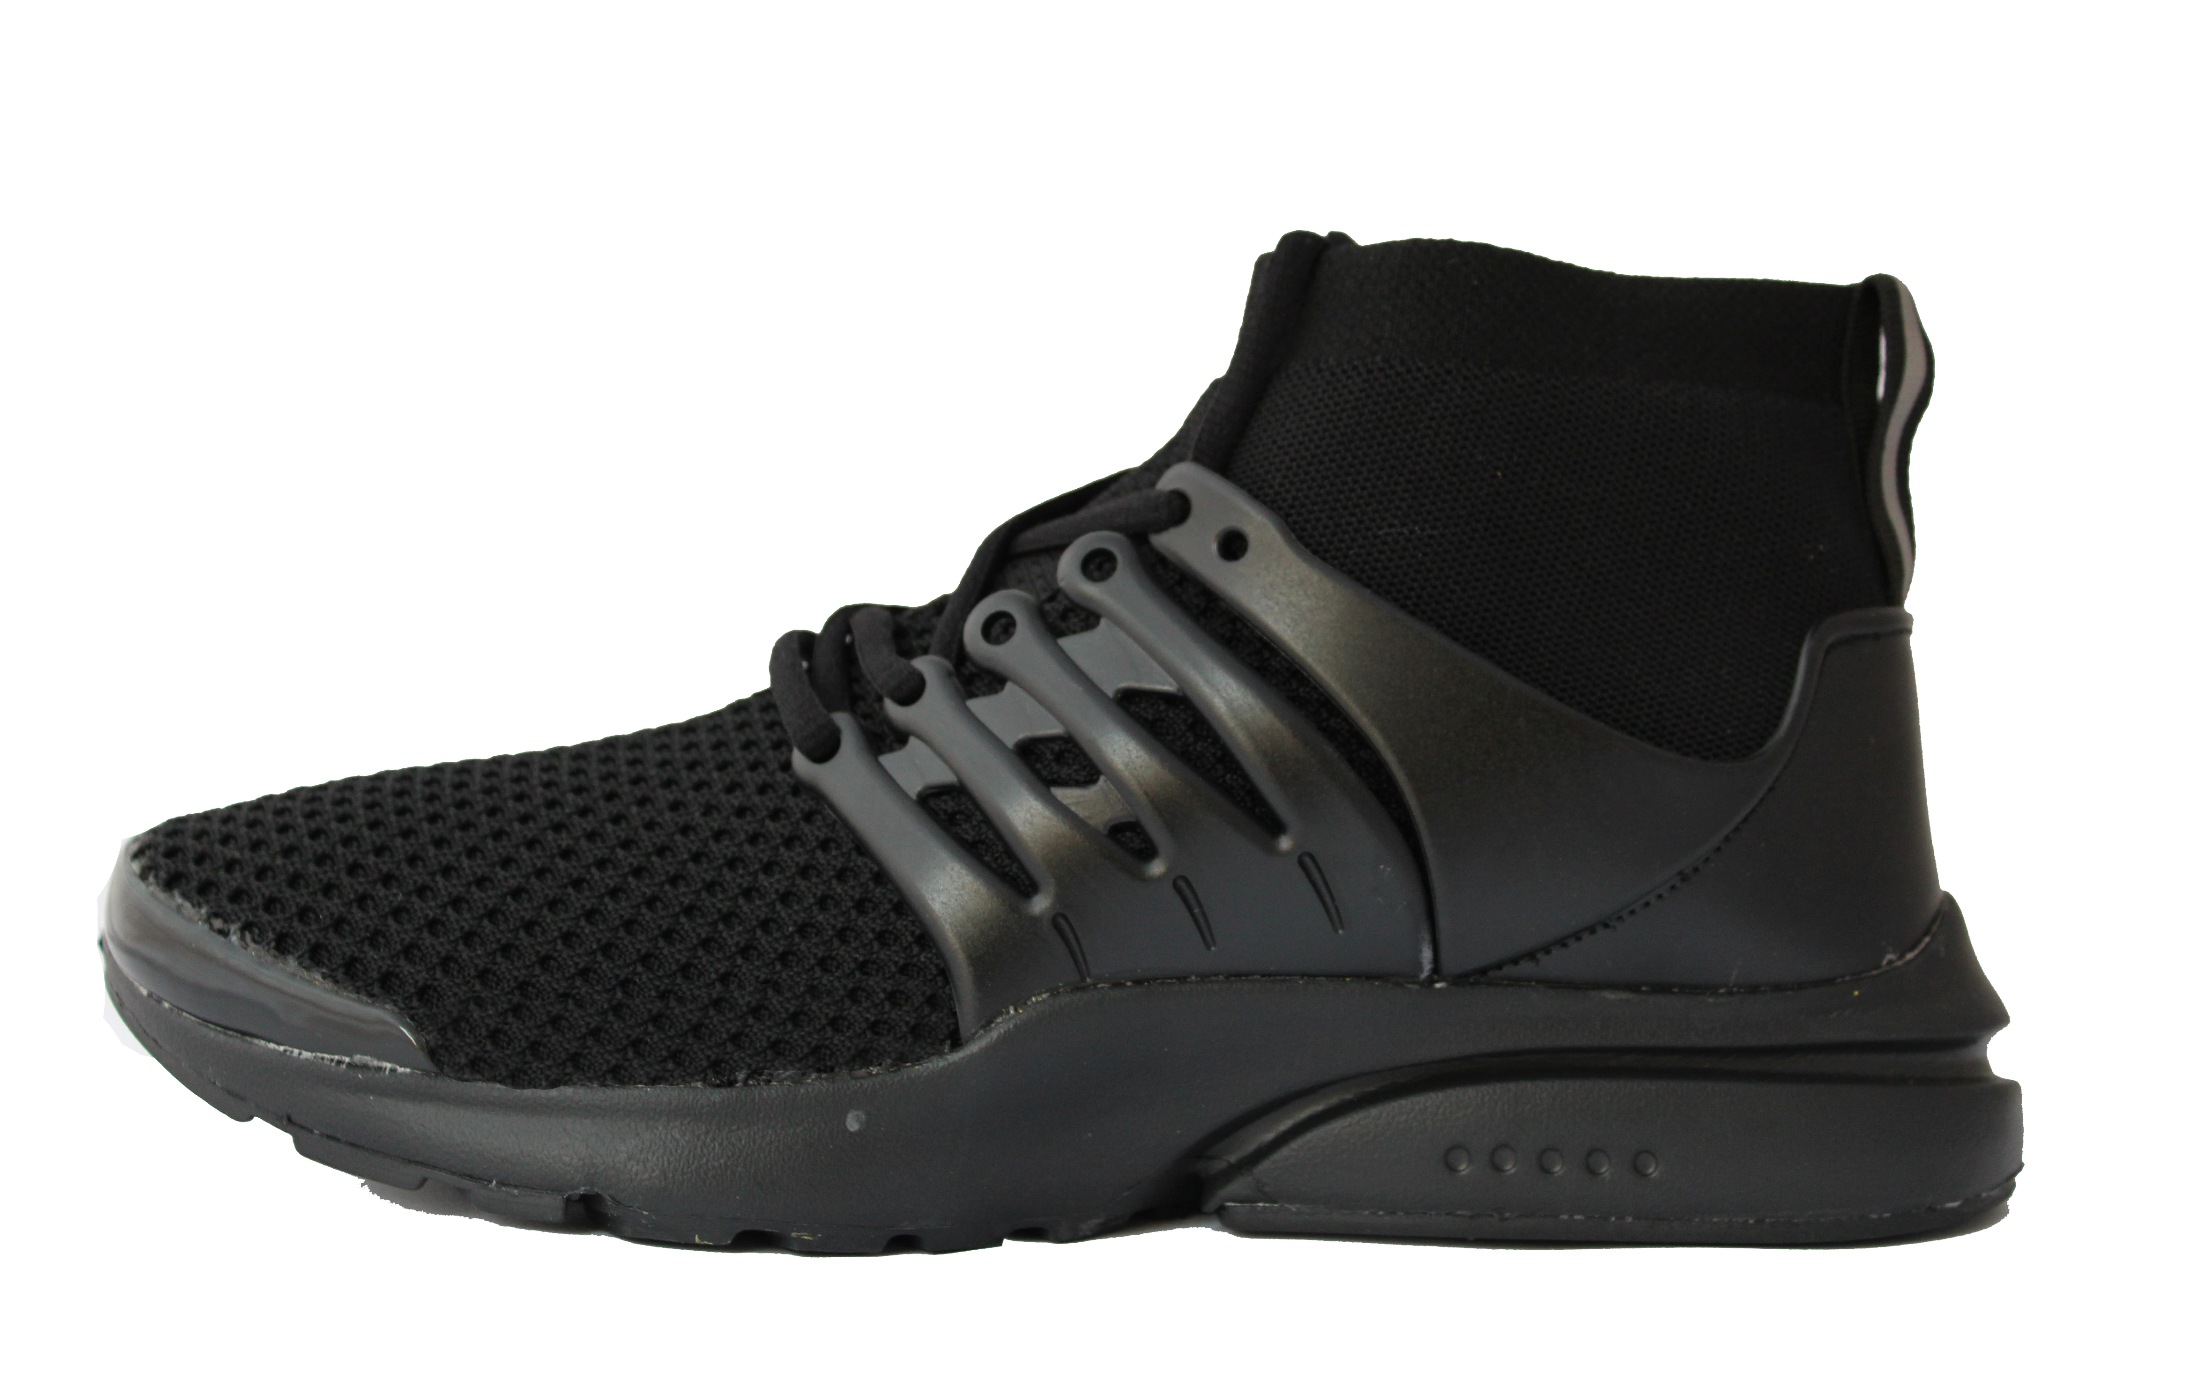 Buy Max Air Training Shoes 8855 Black Online @ ₹1545 from ShopClues